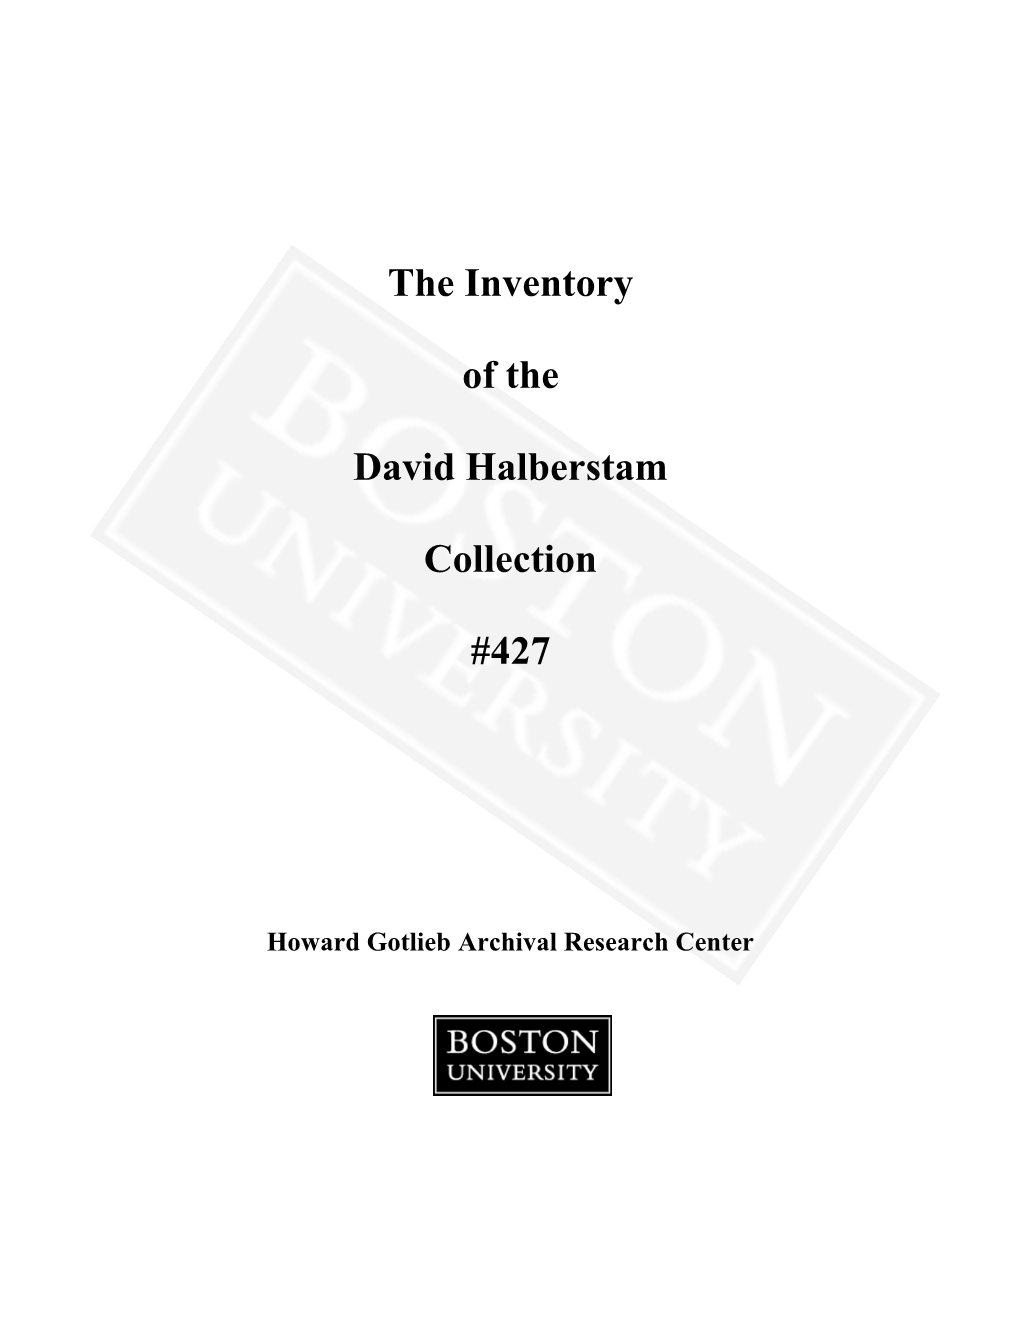 The Inventory of the David Halberstam Collection #427